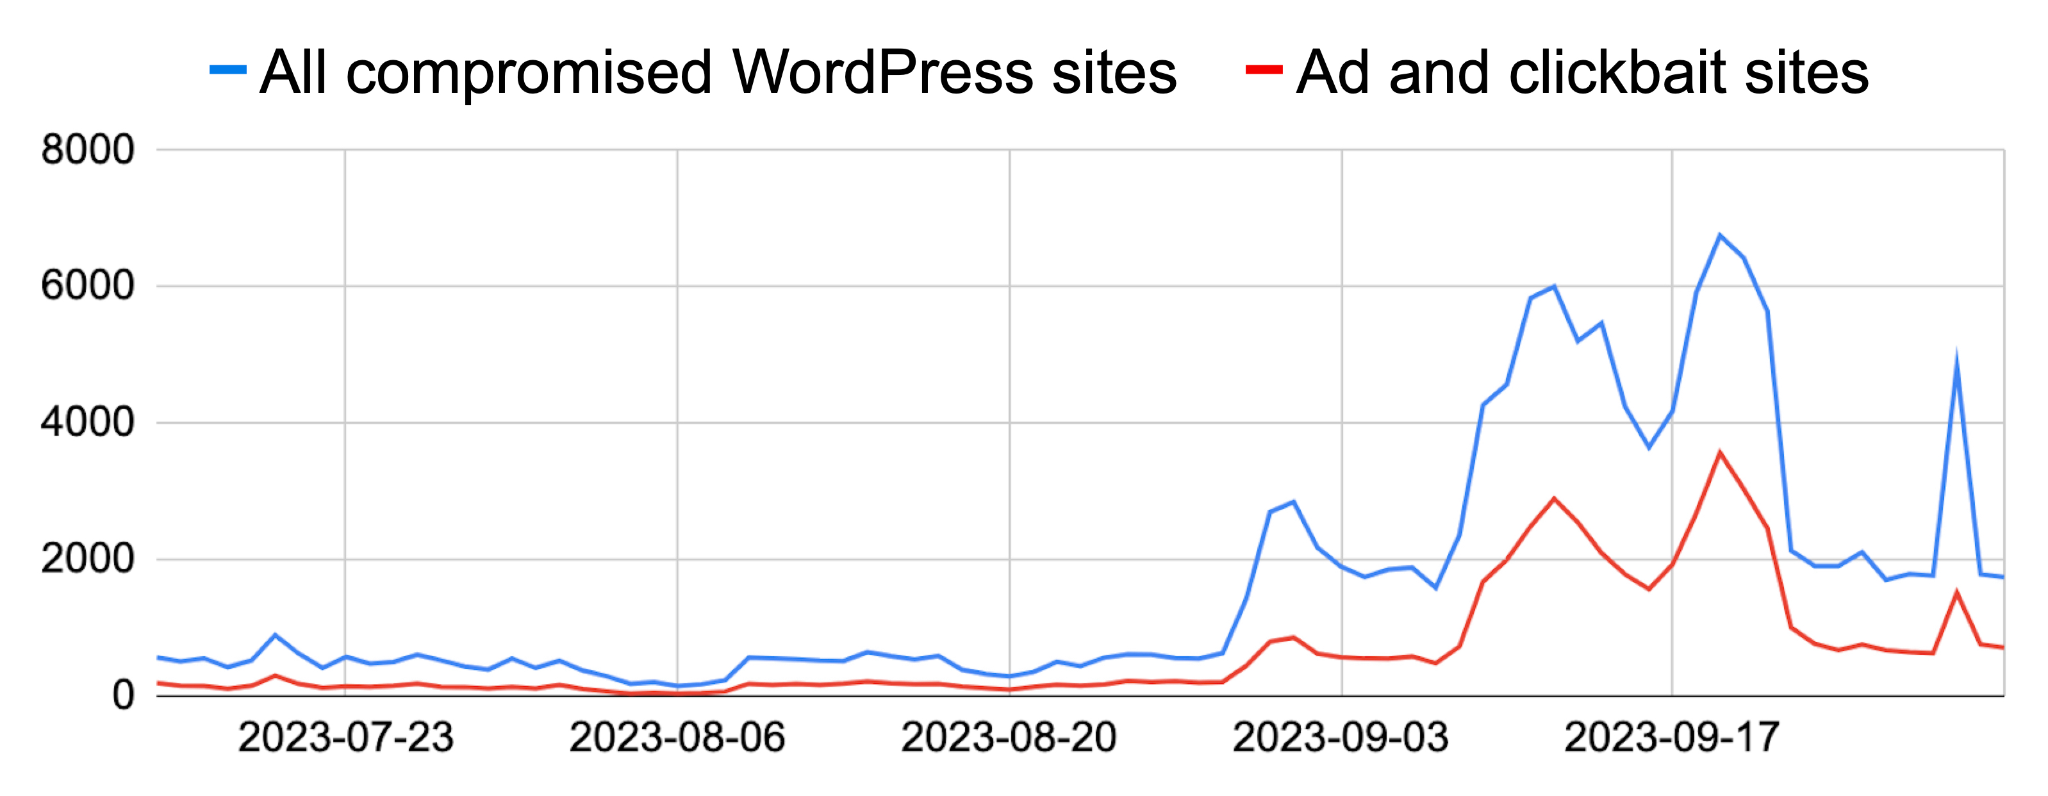 Image 6 is a chart comparing all compromised WordPress sites (blue line) to ad and clickbait sites (red line). The graph starts in late August 2023 and go through September 2023. There is a spike in activity starting in September. 